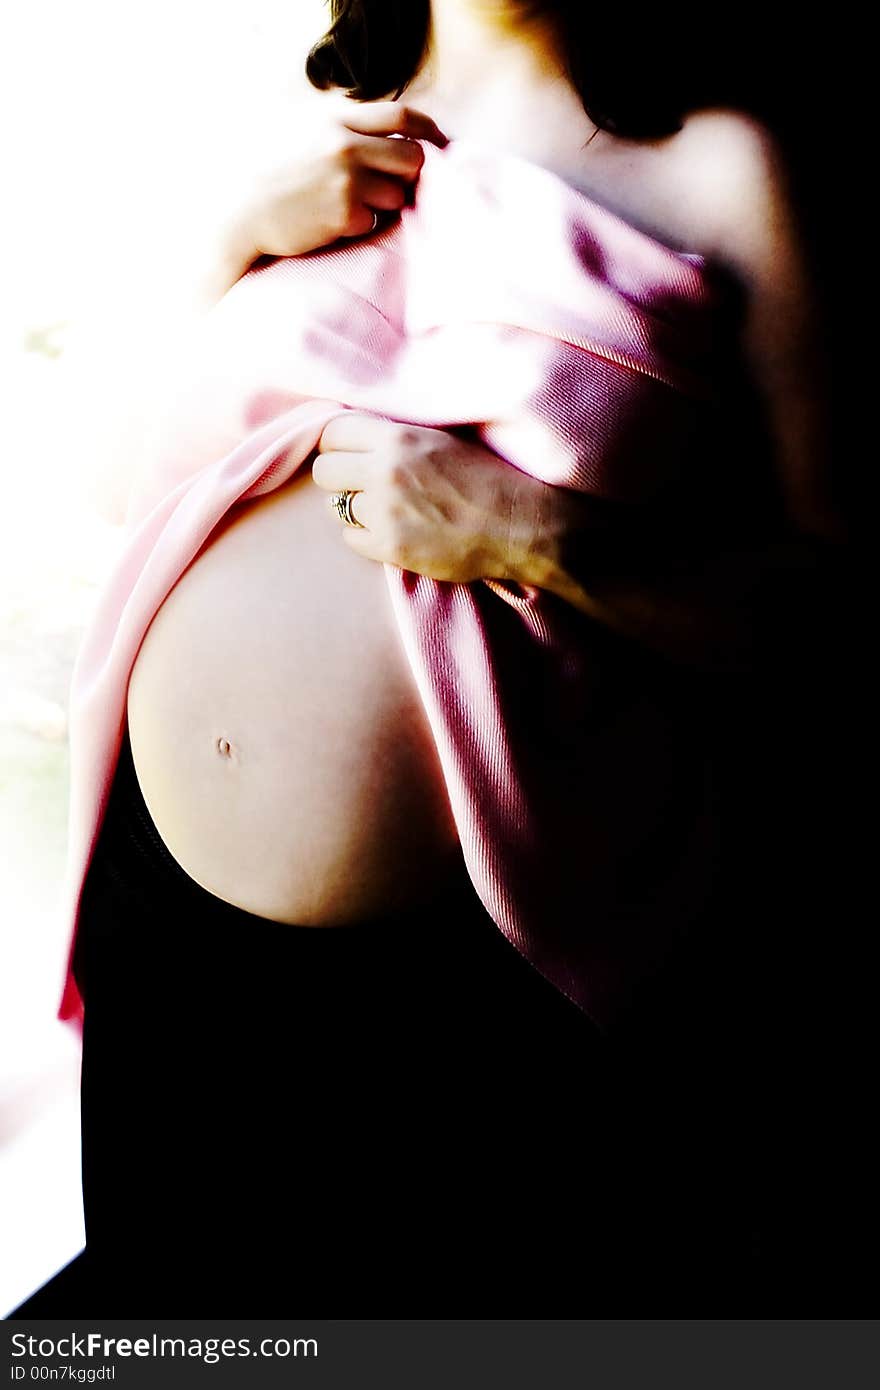 Pregnant woman belly exposed with pink wrap in window light trunk only